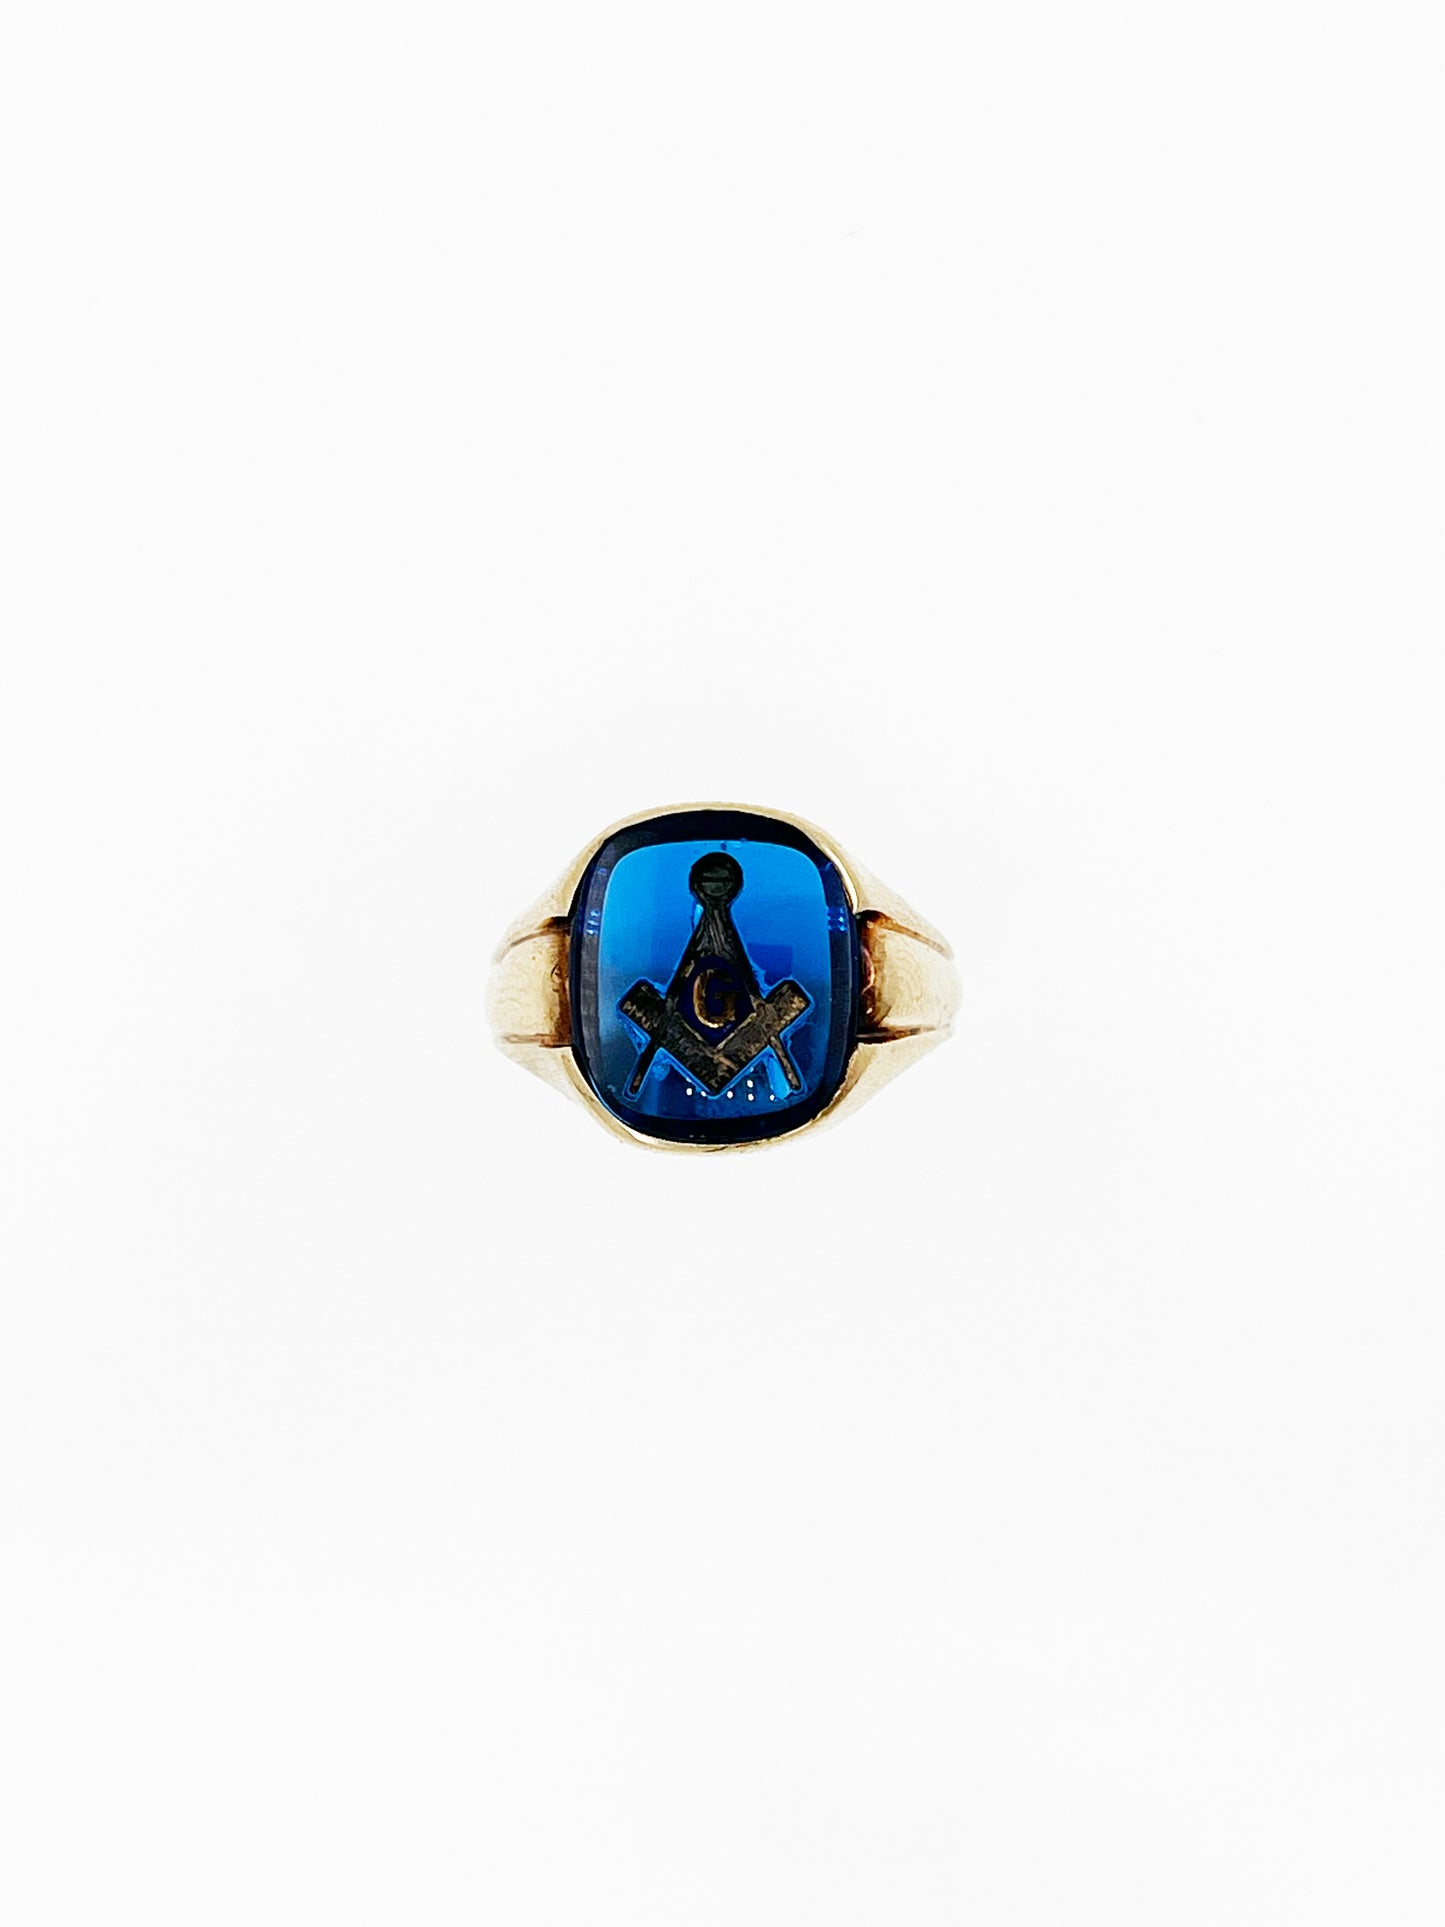 Antique Carved Blue Sapphire Mason Ring in 10k Yellow Gold